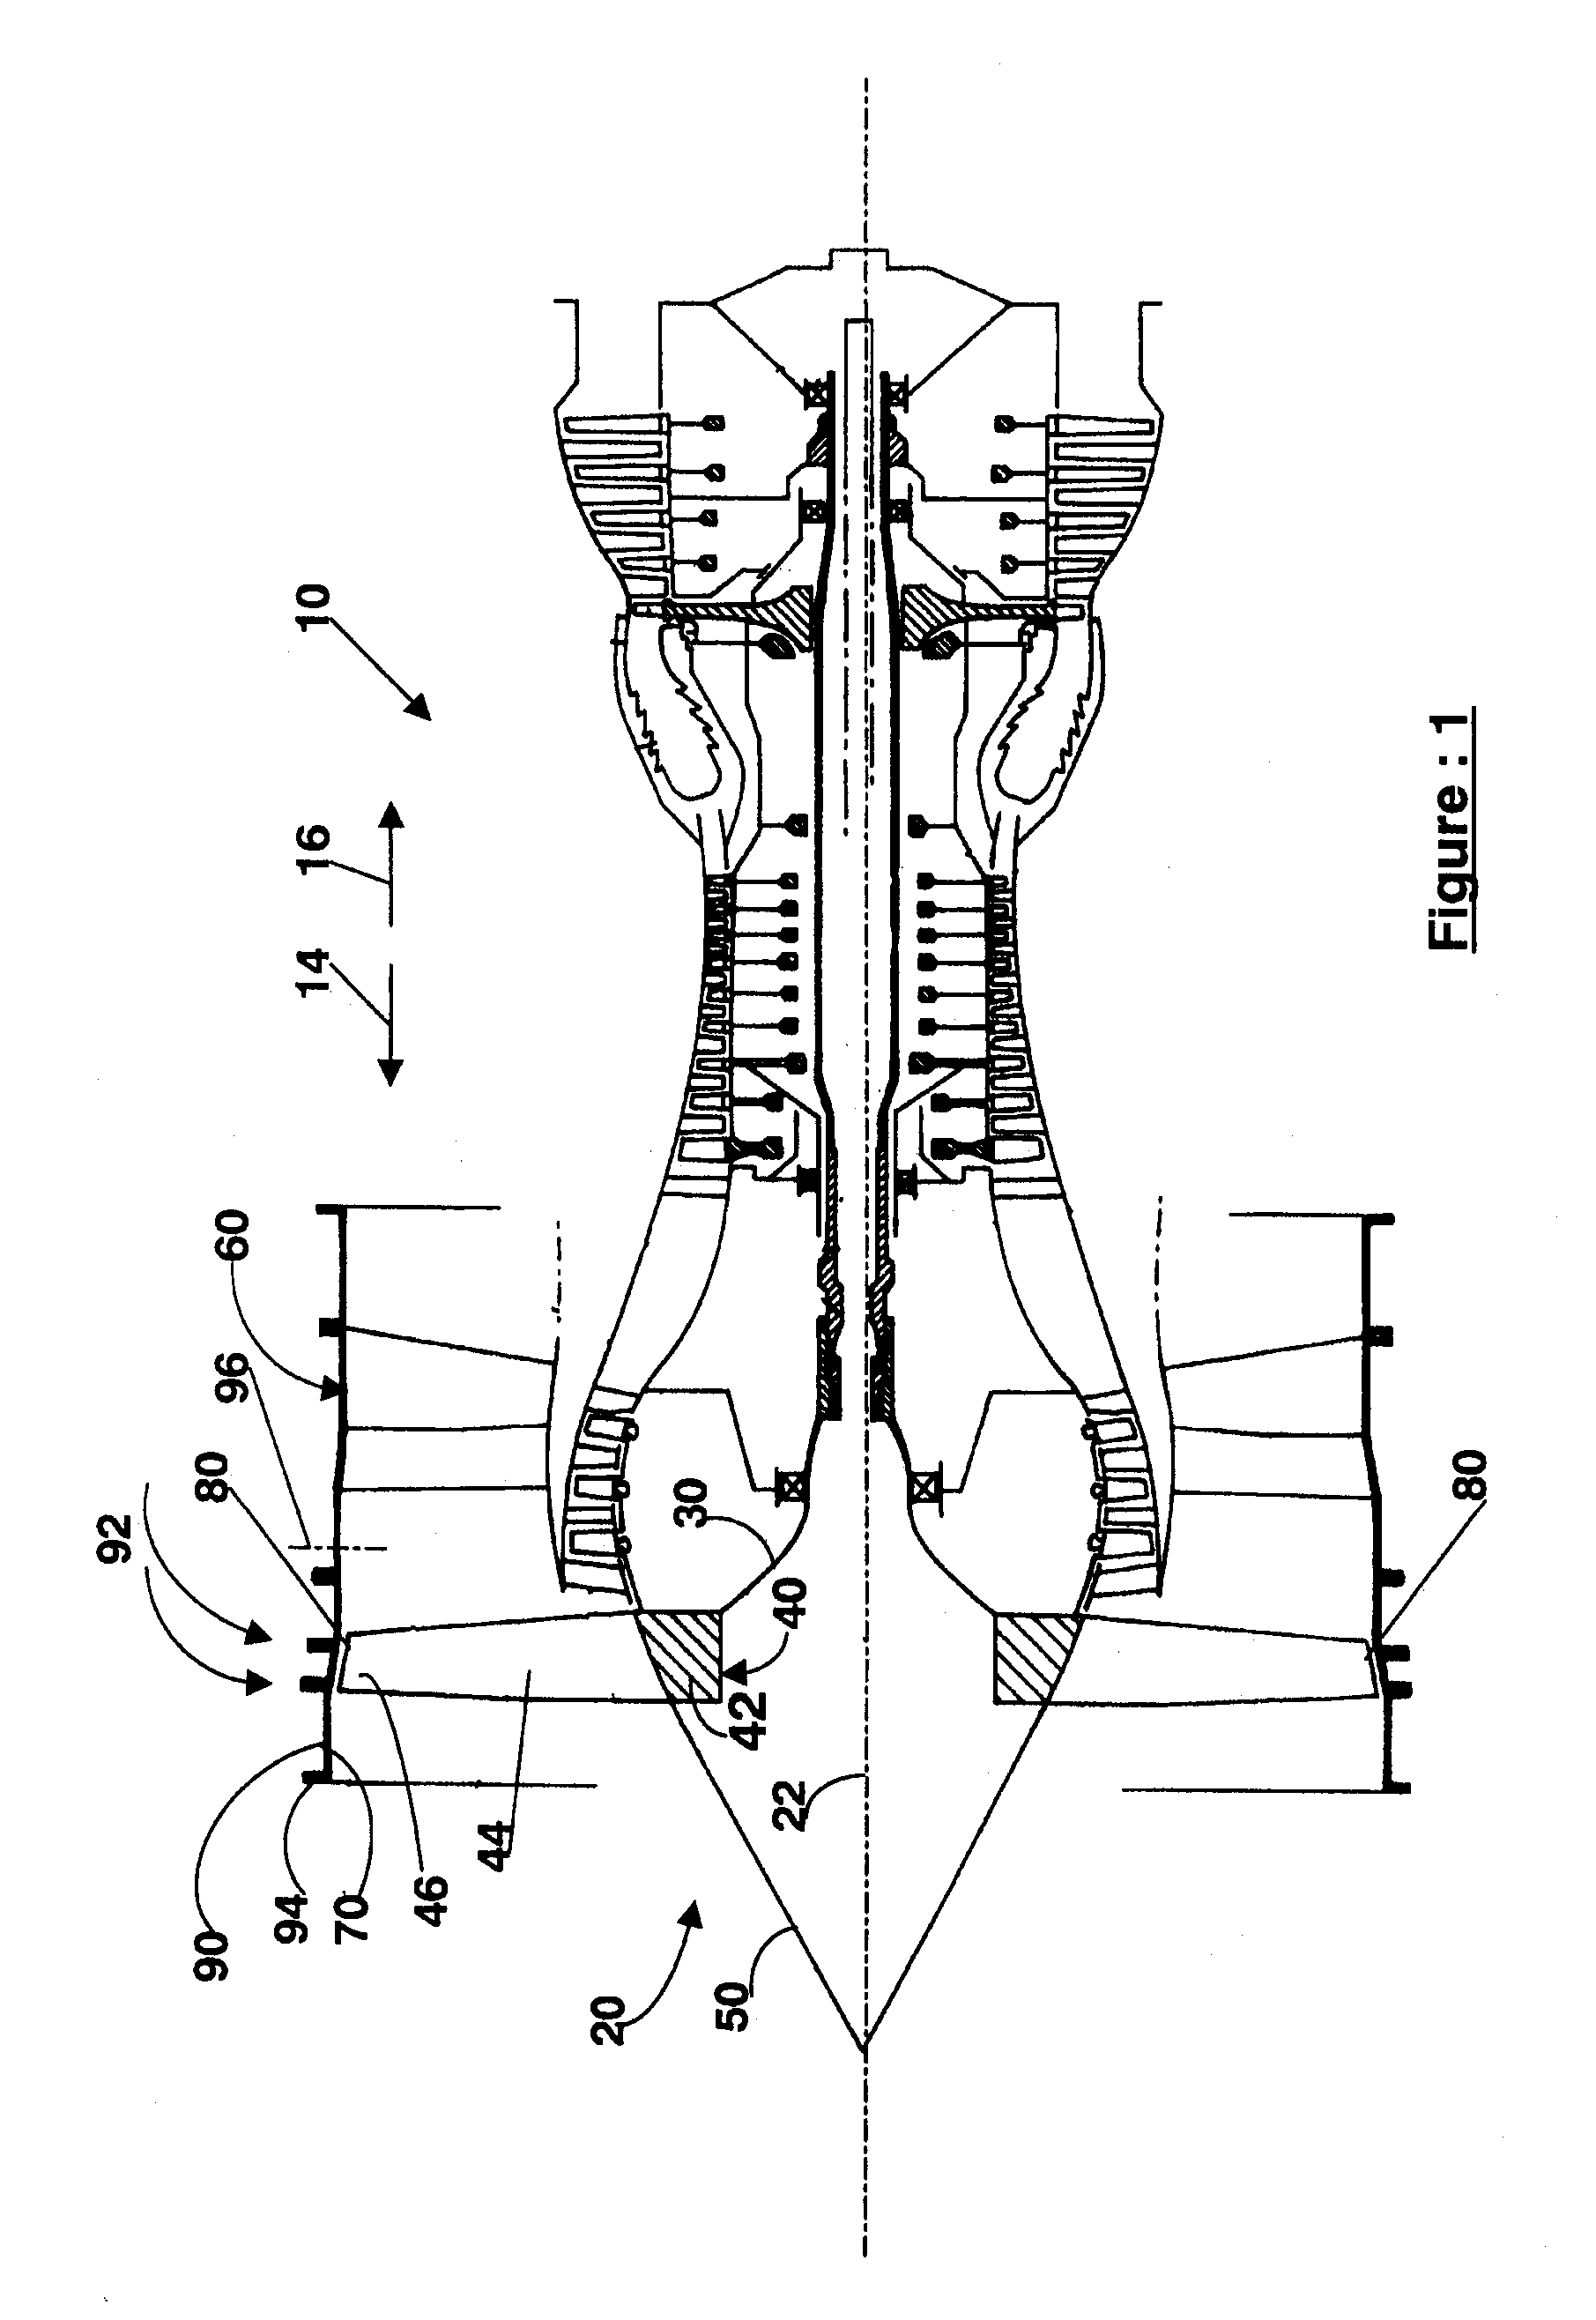 Method of replacing an abradable portion on the casing on a turbojet fan